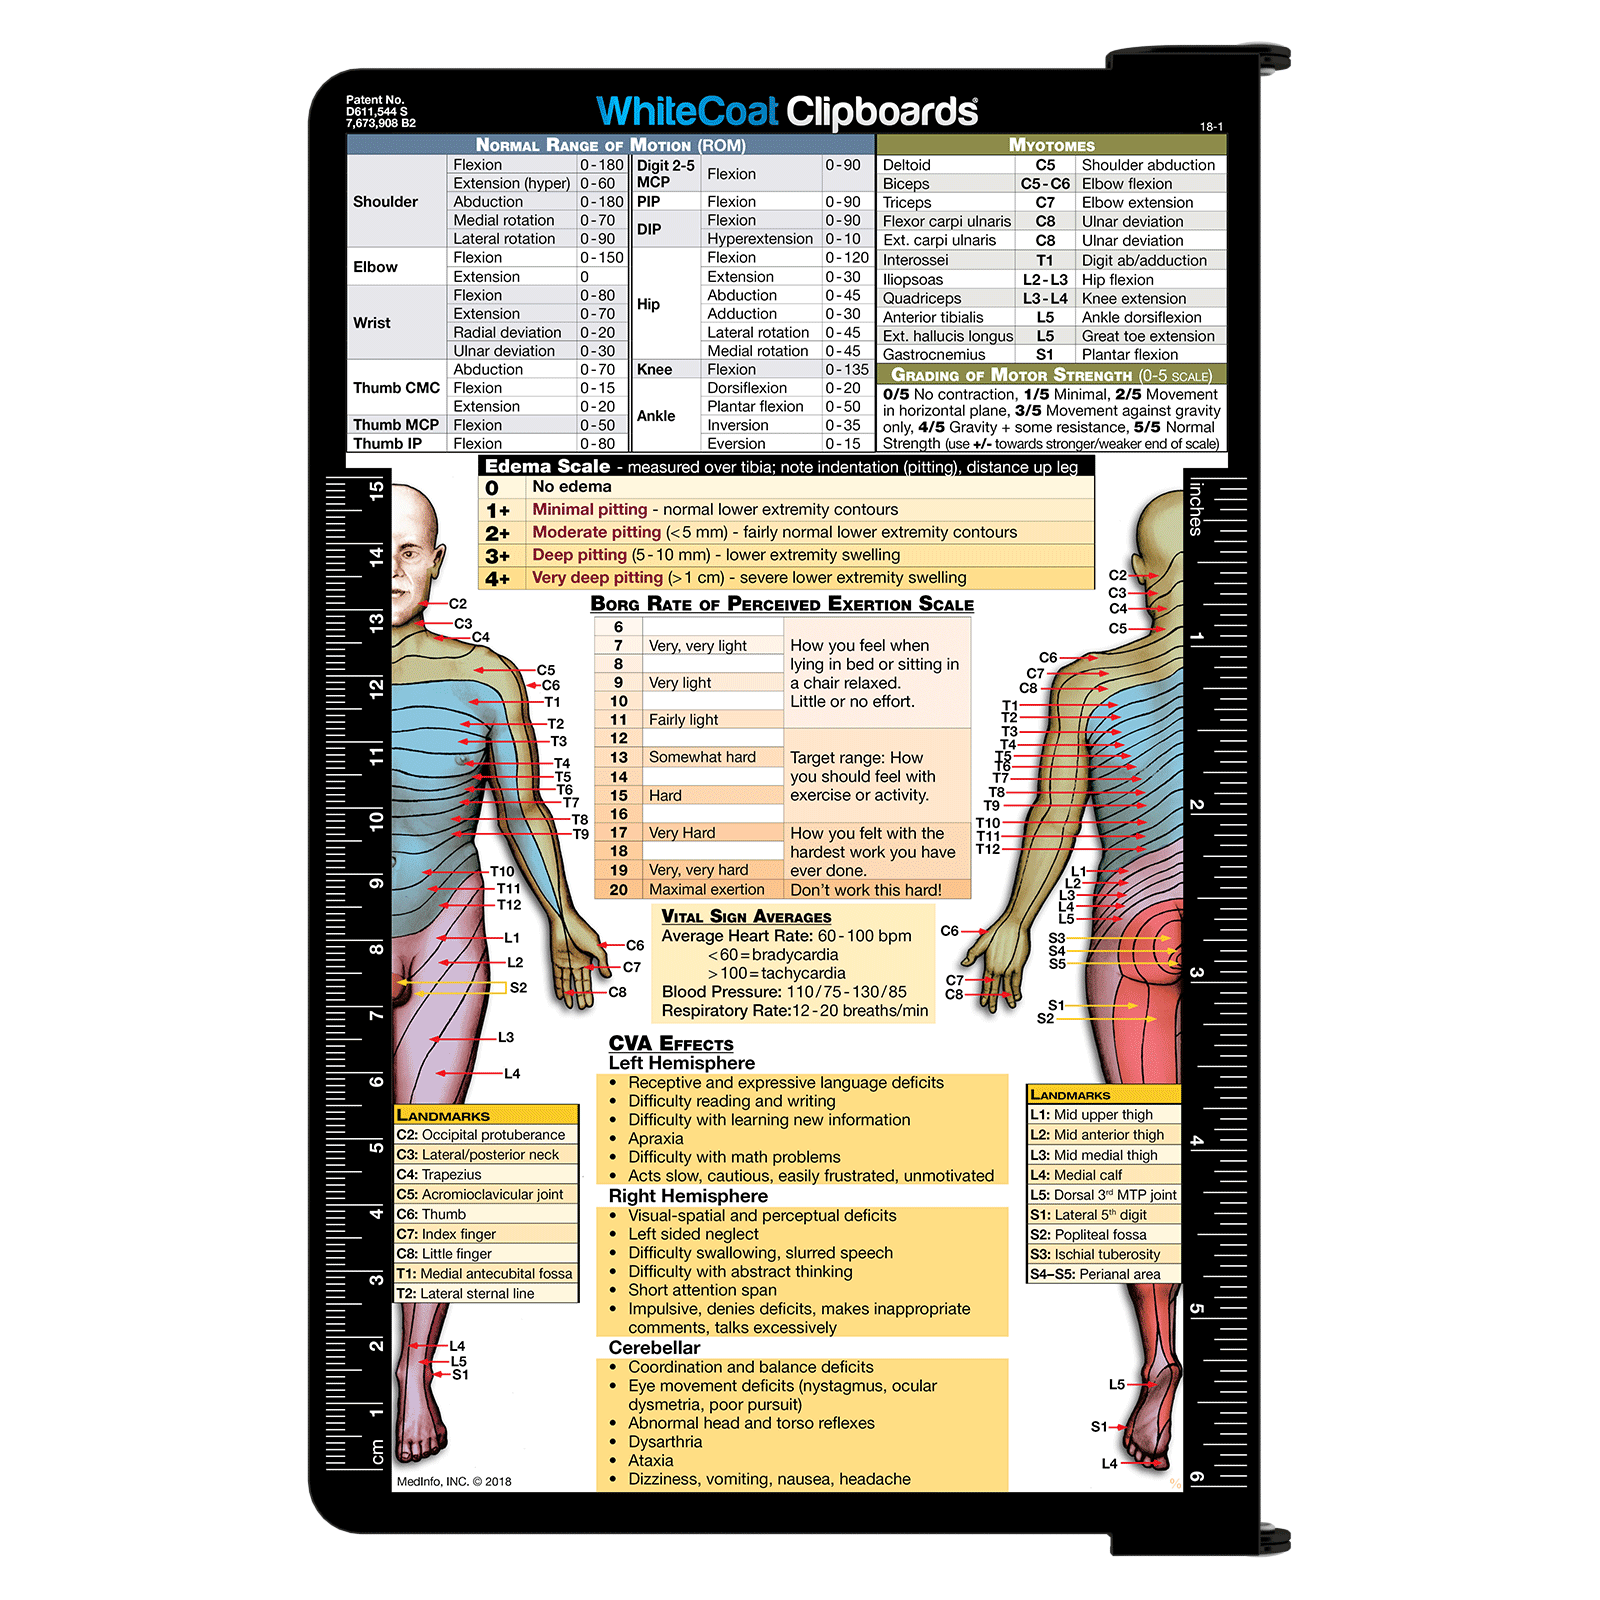 WhiteCoat Clipboard - Physical Therapy Edition